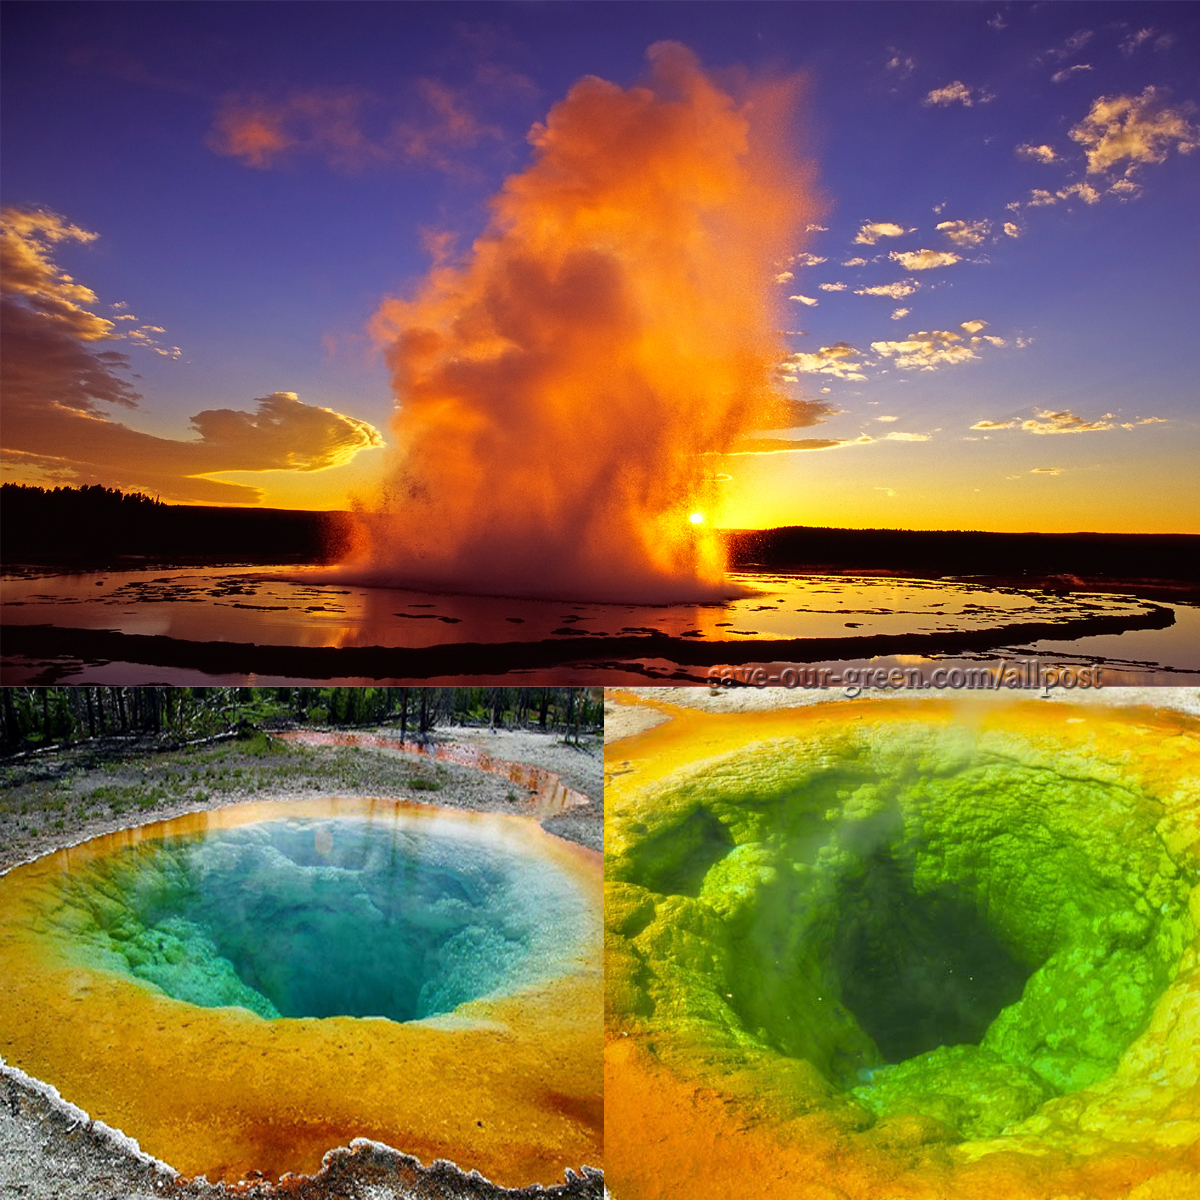 The Yellowstone National Park - Save Our Green